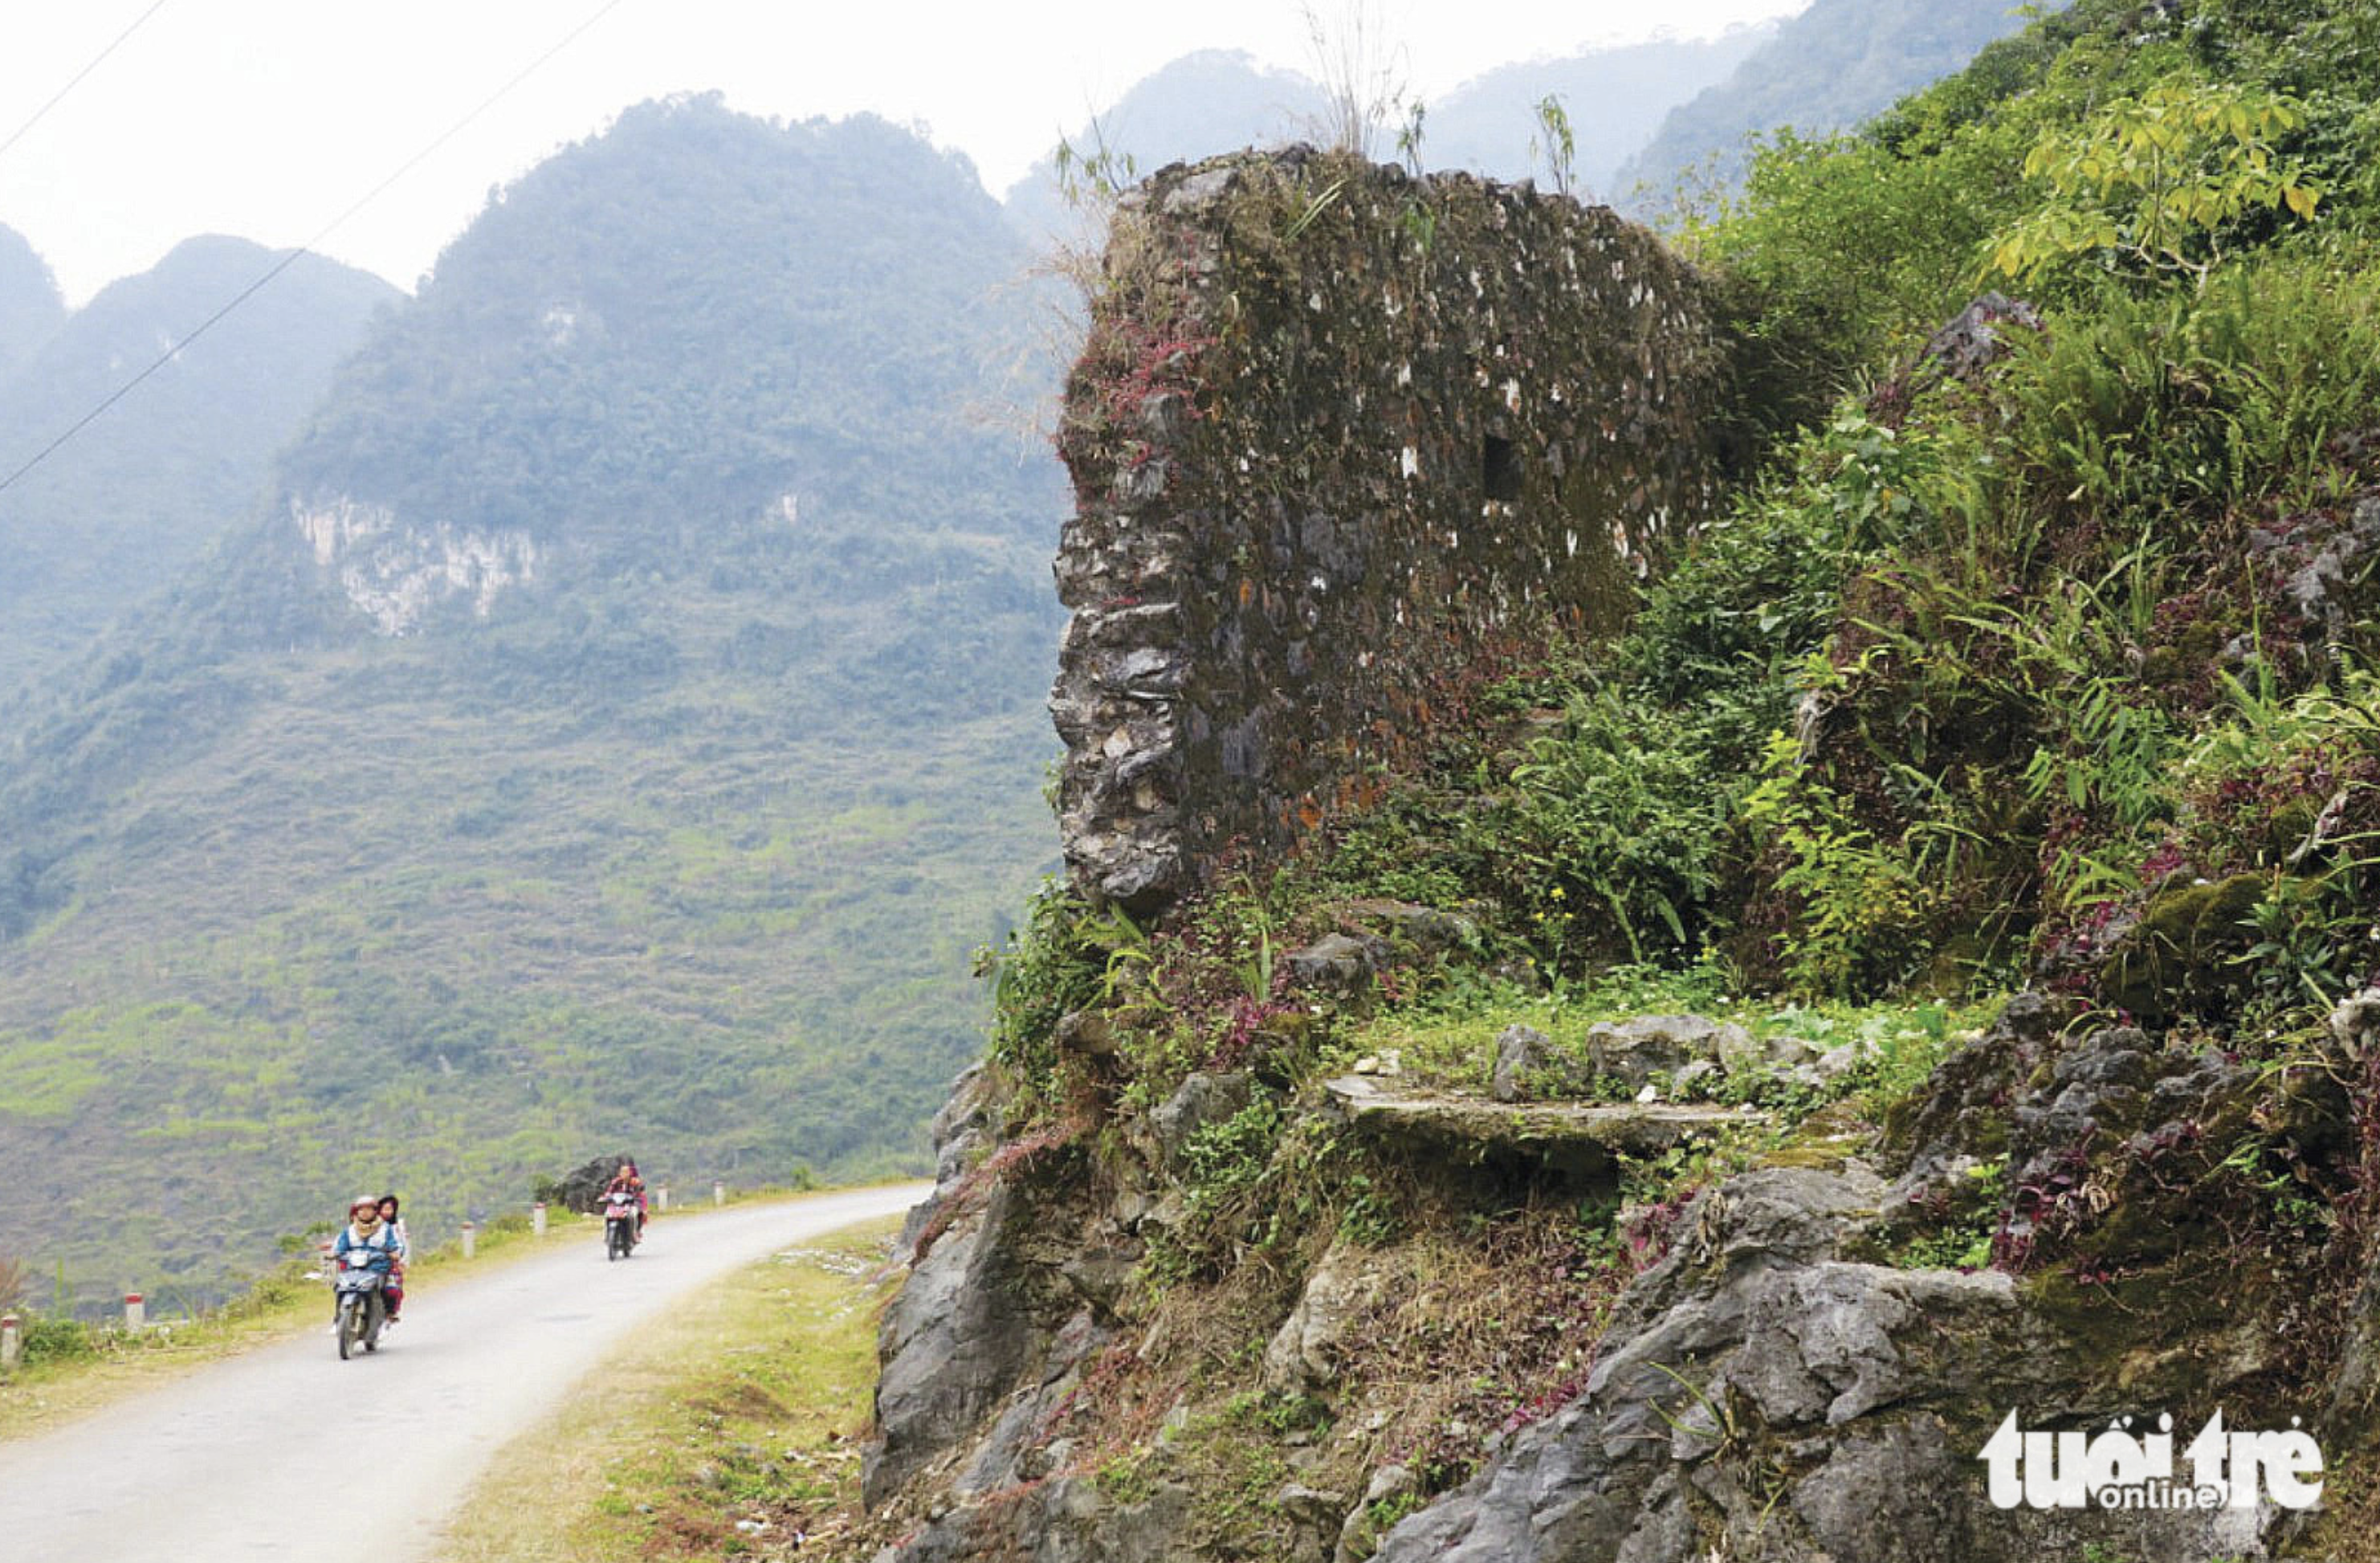 Lung Ho Fort is one of Ha Giang Province’s must-visit relic sites. Photo: T.T.D. / Tuoi Tre